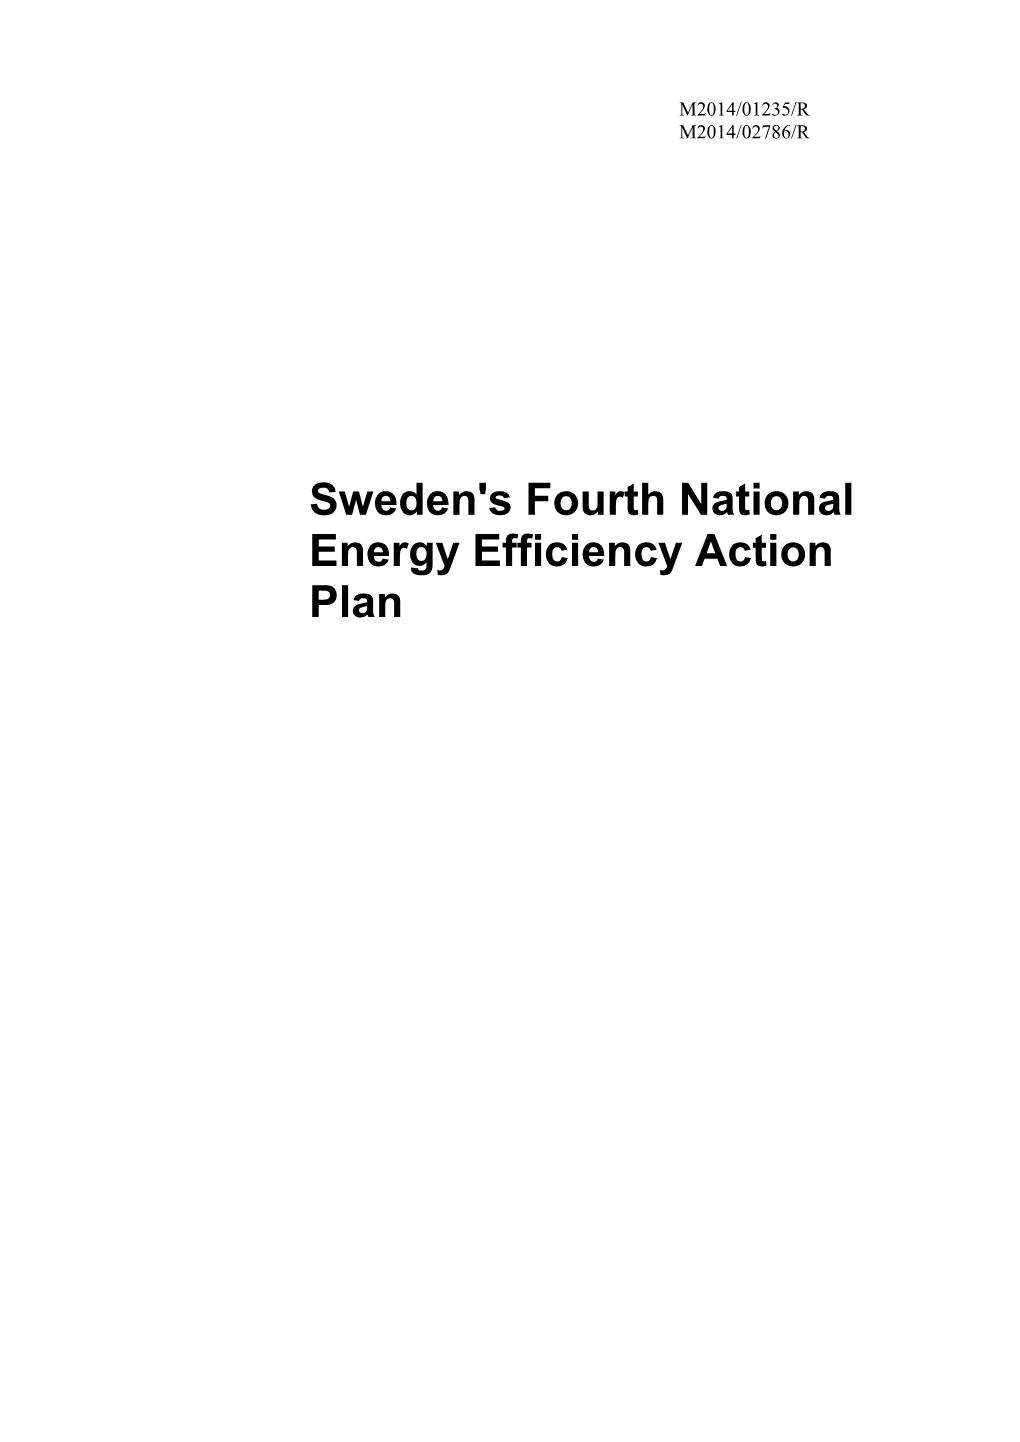 Sweden's Fourth National Energy Efficiency Action Plan